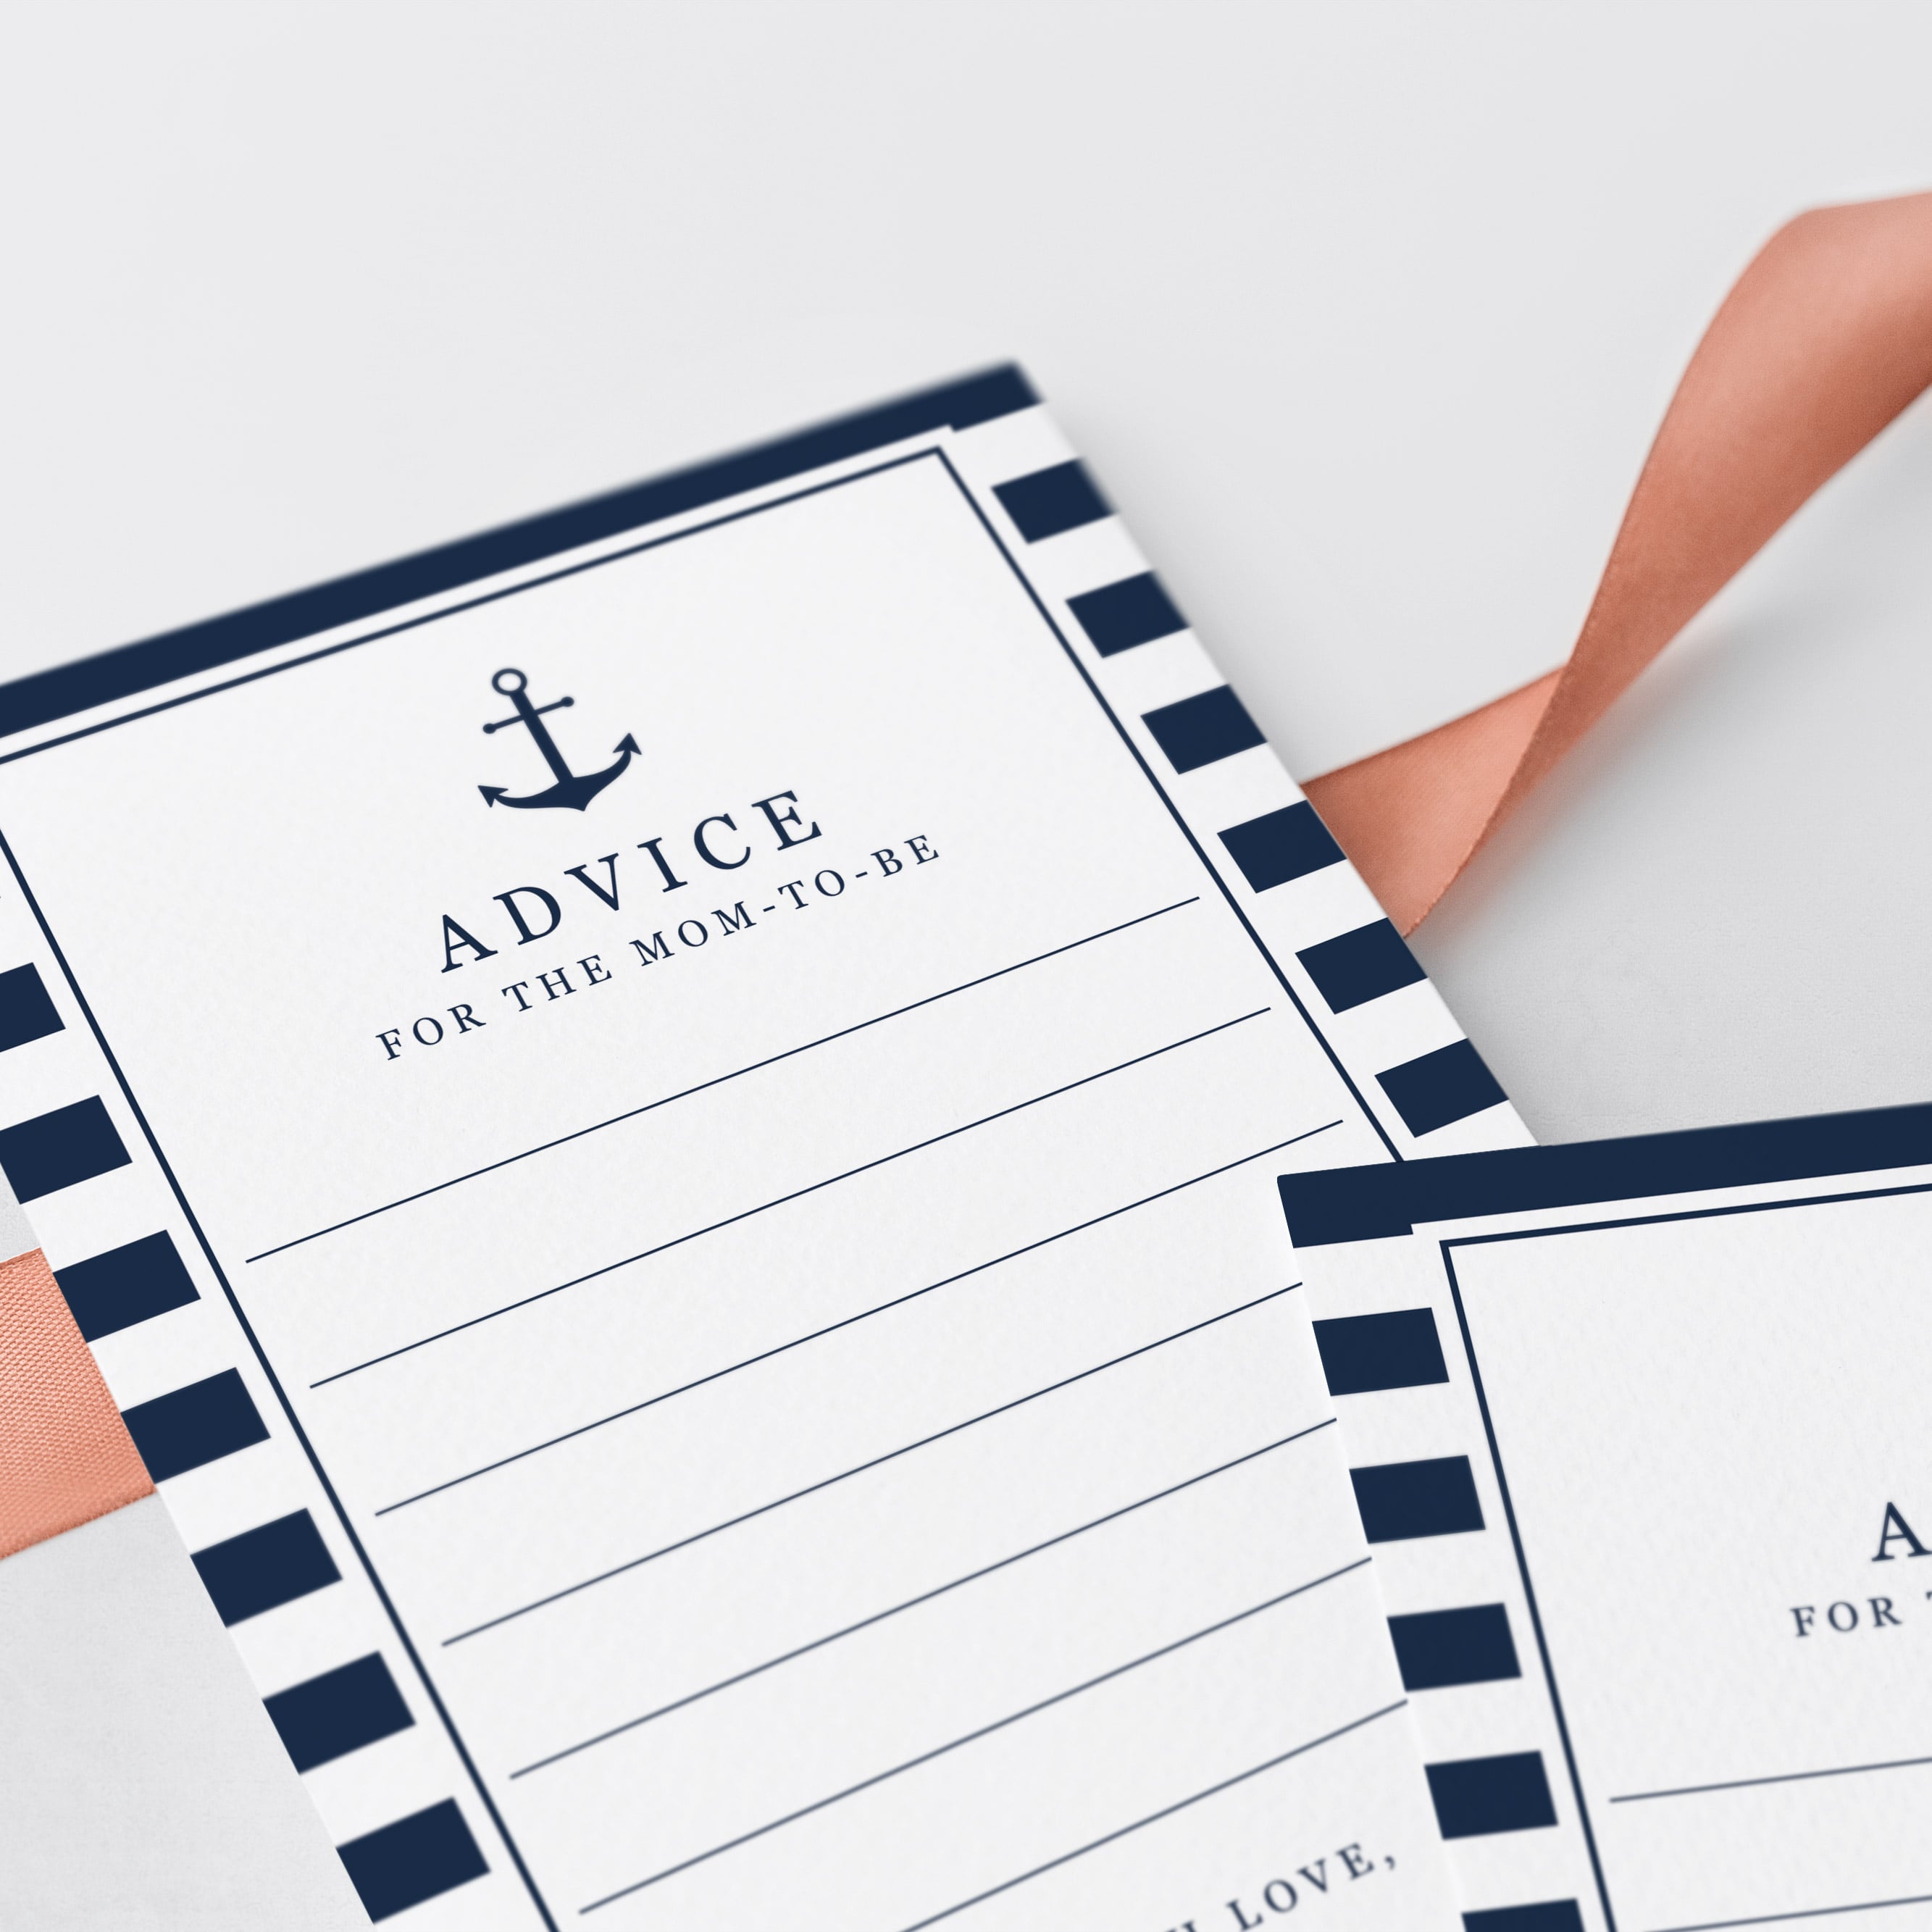 Nautical themed baby shower advice card printable by LittleSizzle